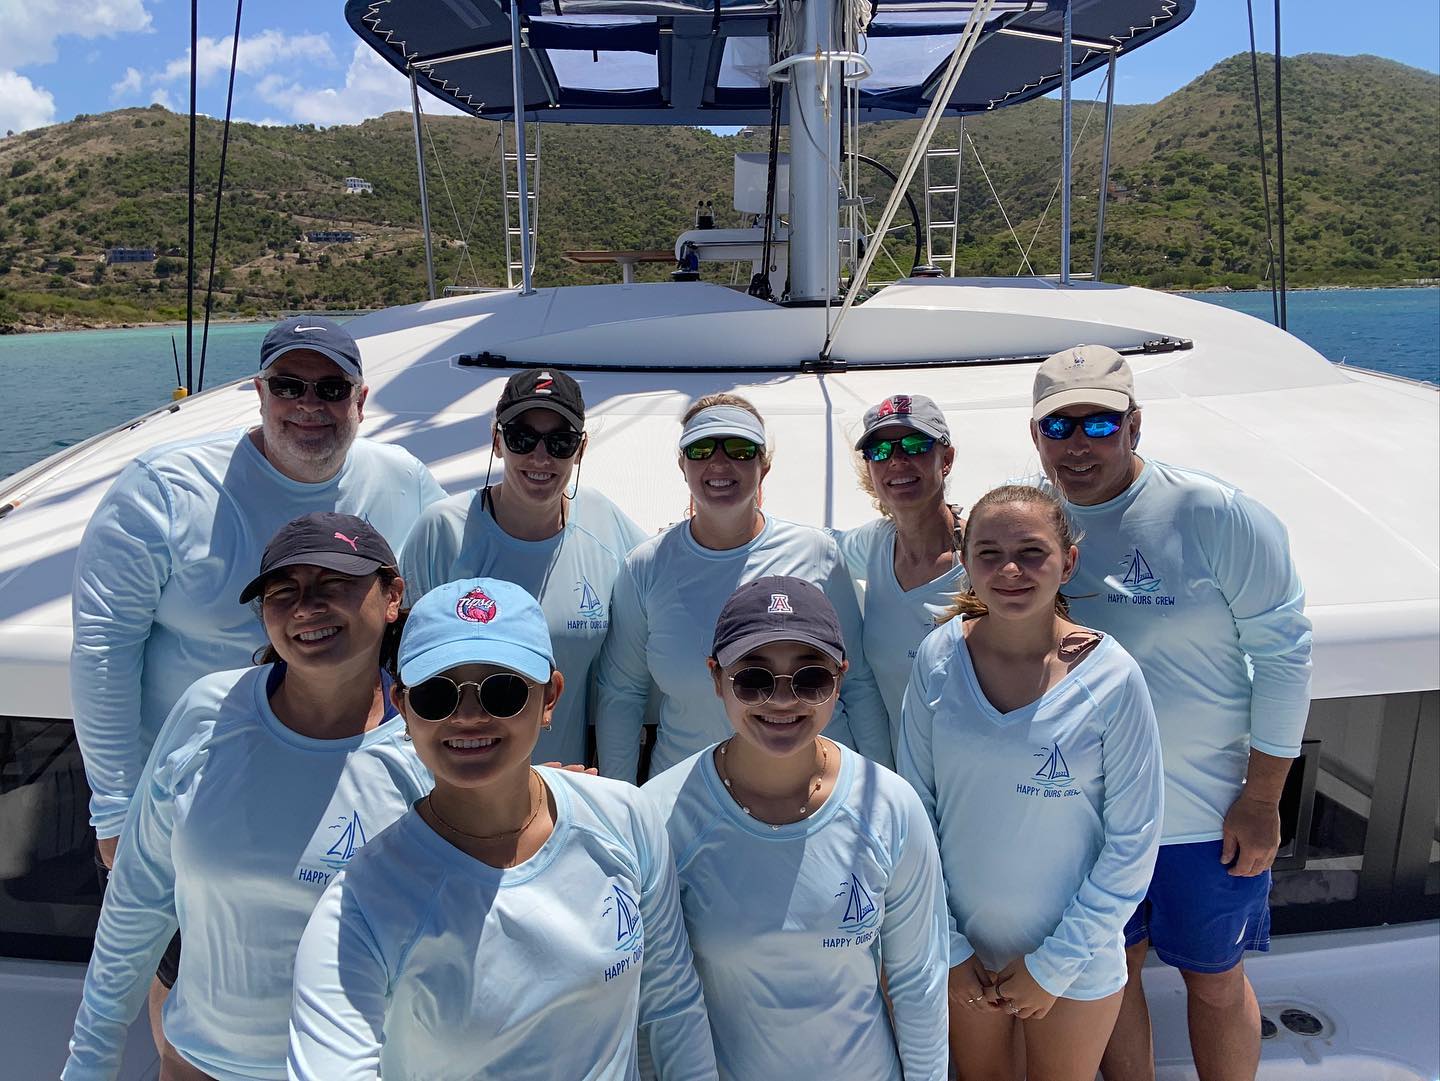 Artic Blue solar shirts used for cruising the blue seas